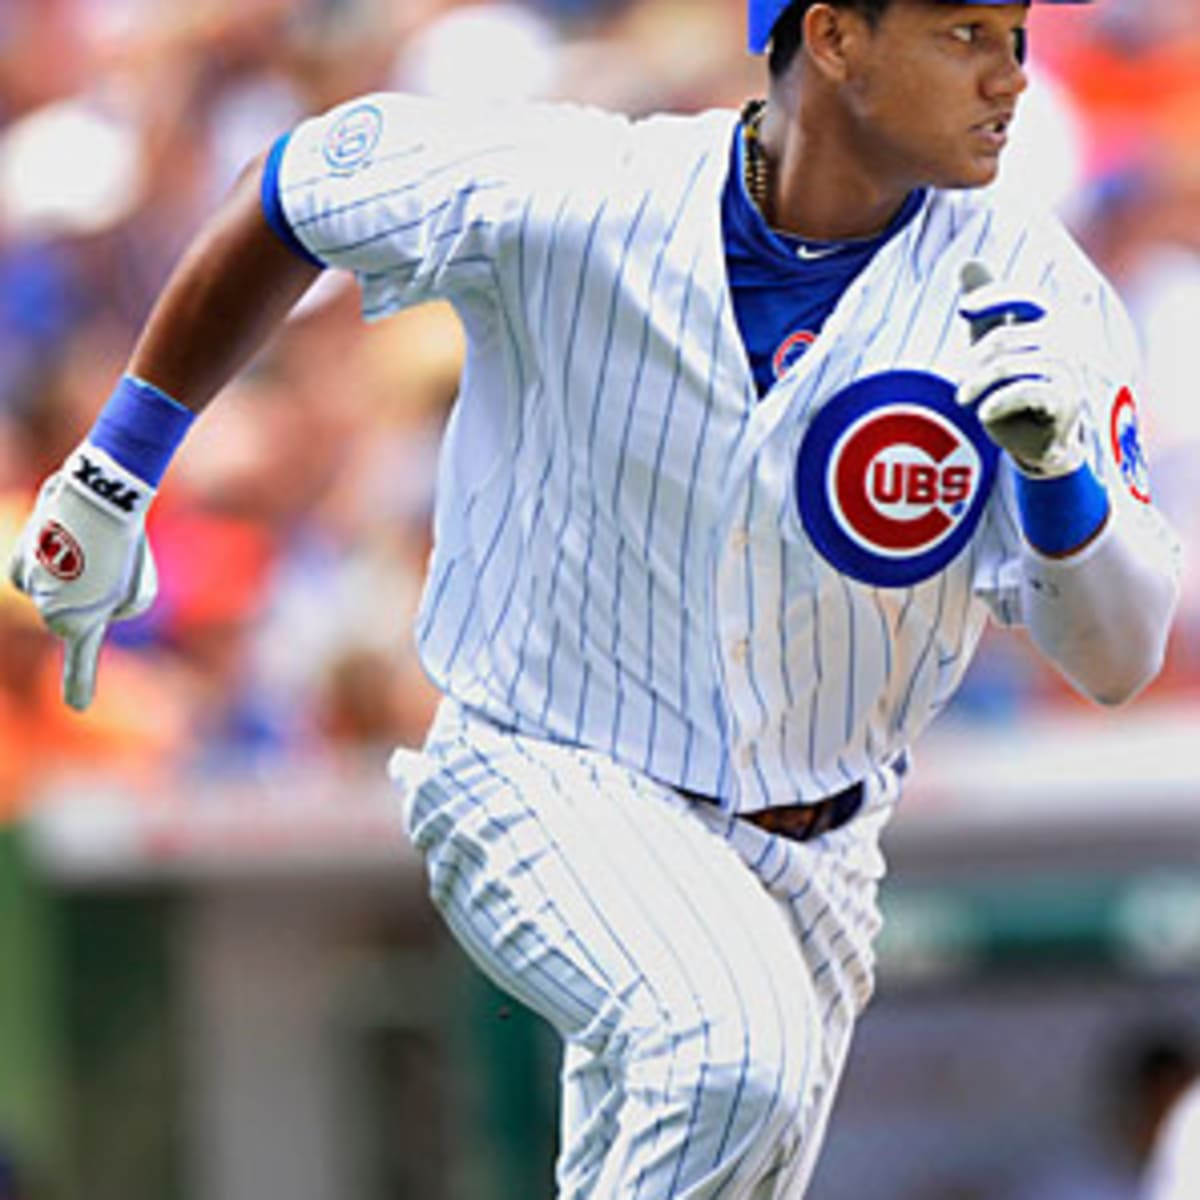 Cubs' Starlin Castro not likely to land with Mets - Newsday